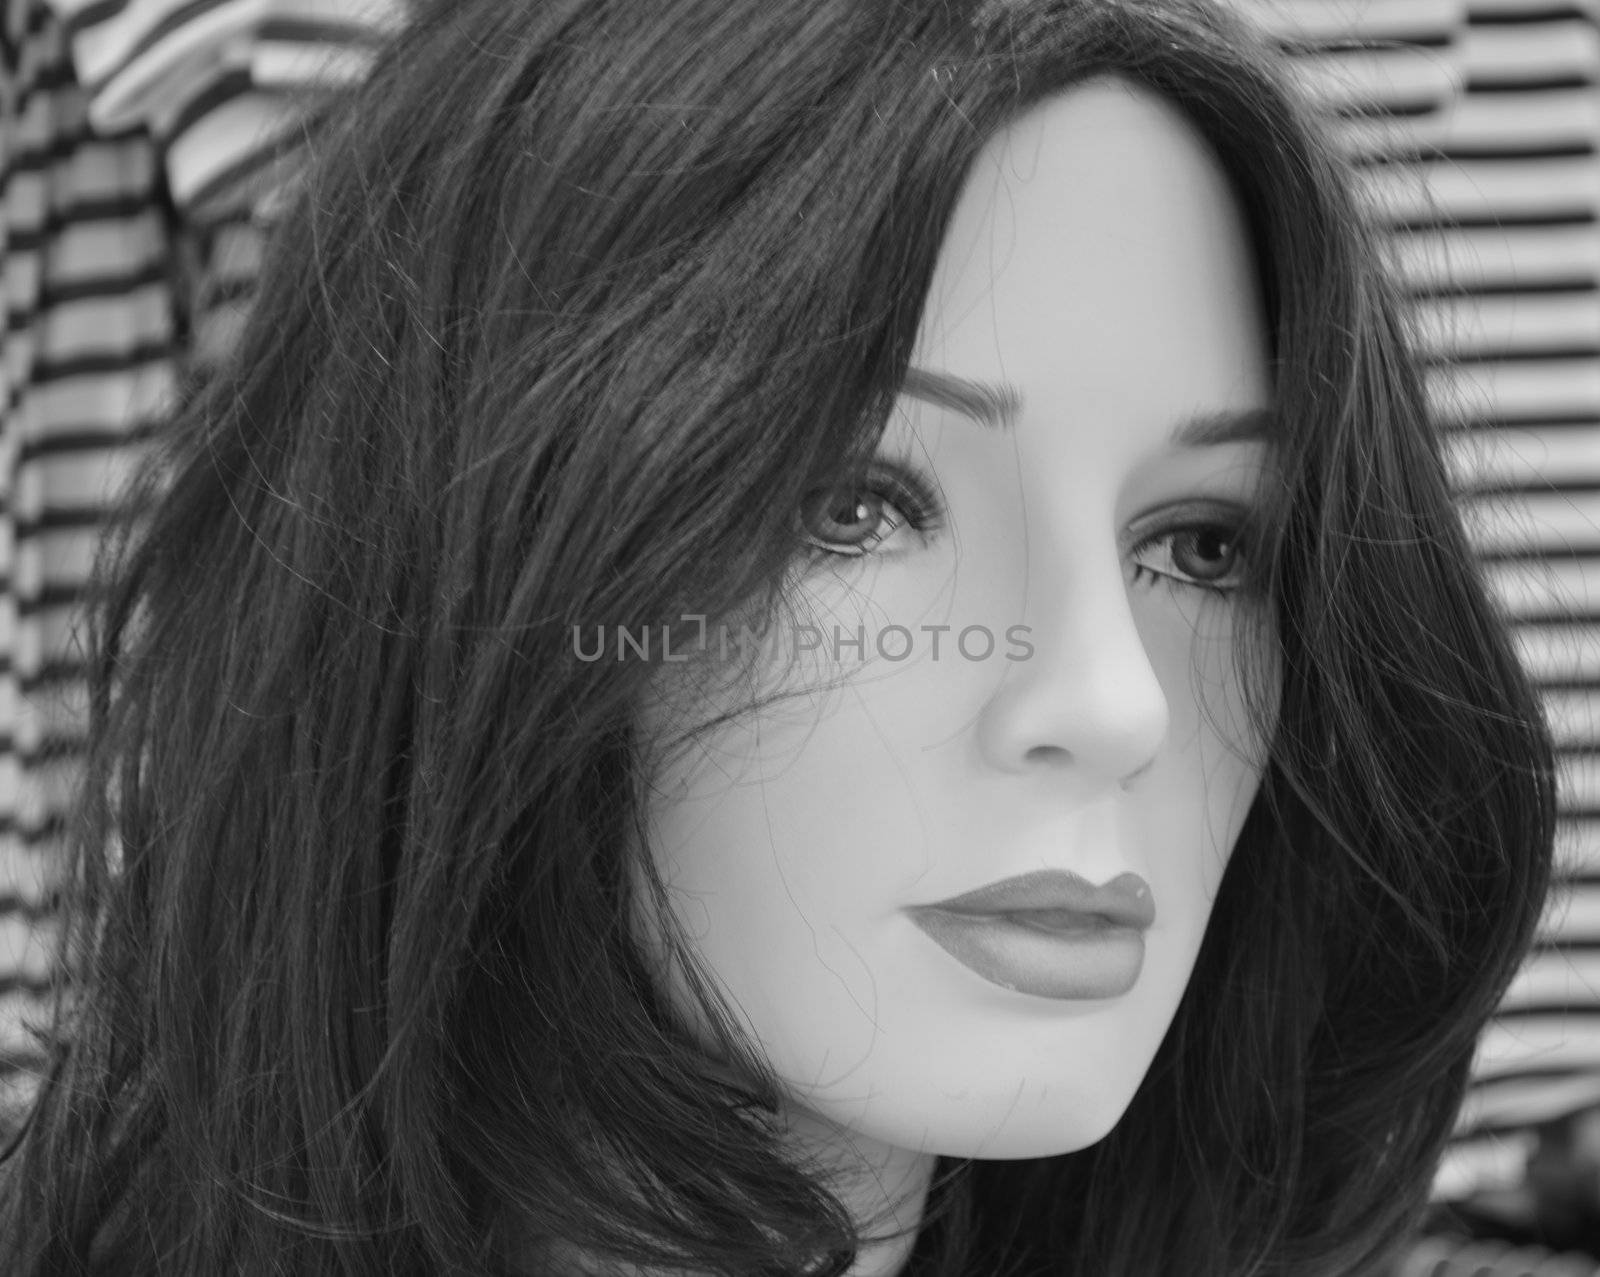 Monochrome close up orf mannequins head with long hair